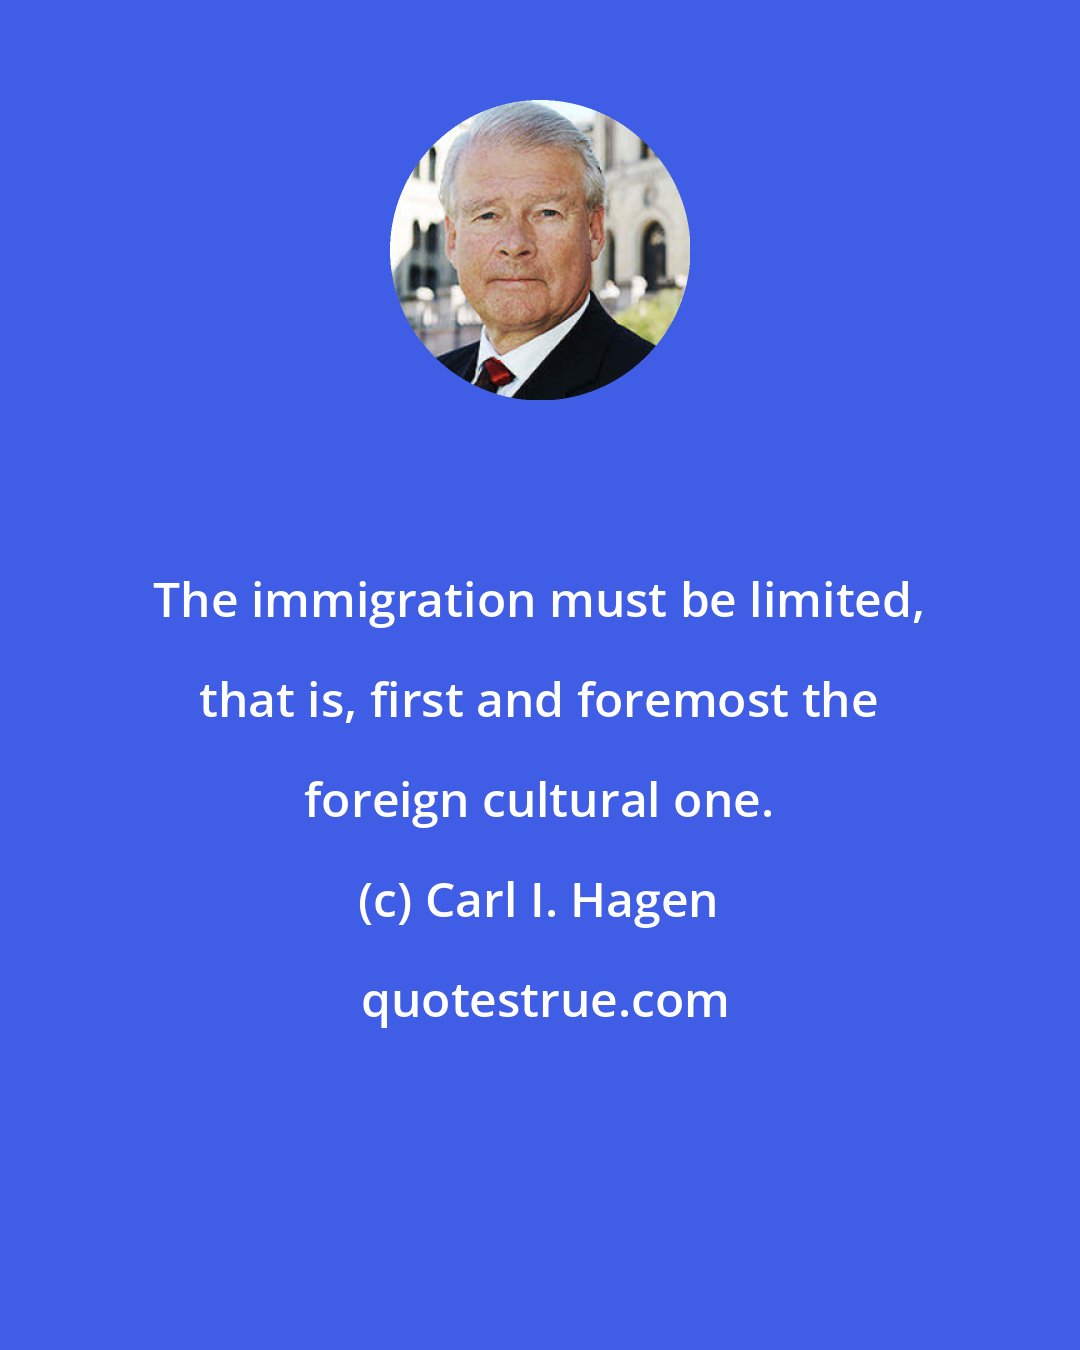 Carl I. Hagen: The immigration must be limited, that is, first and foremost the foreign cultural one.